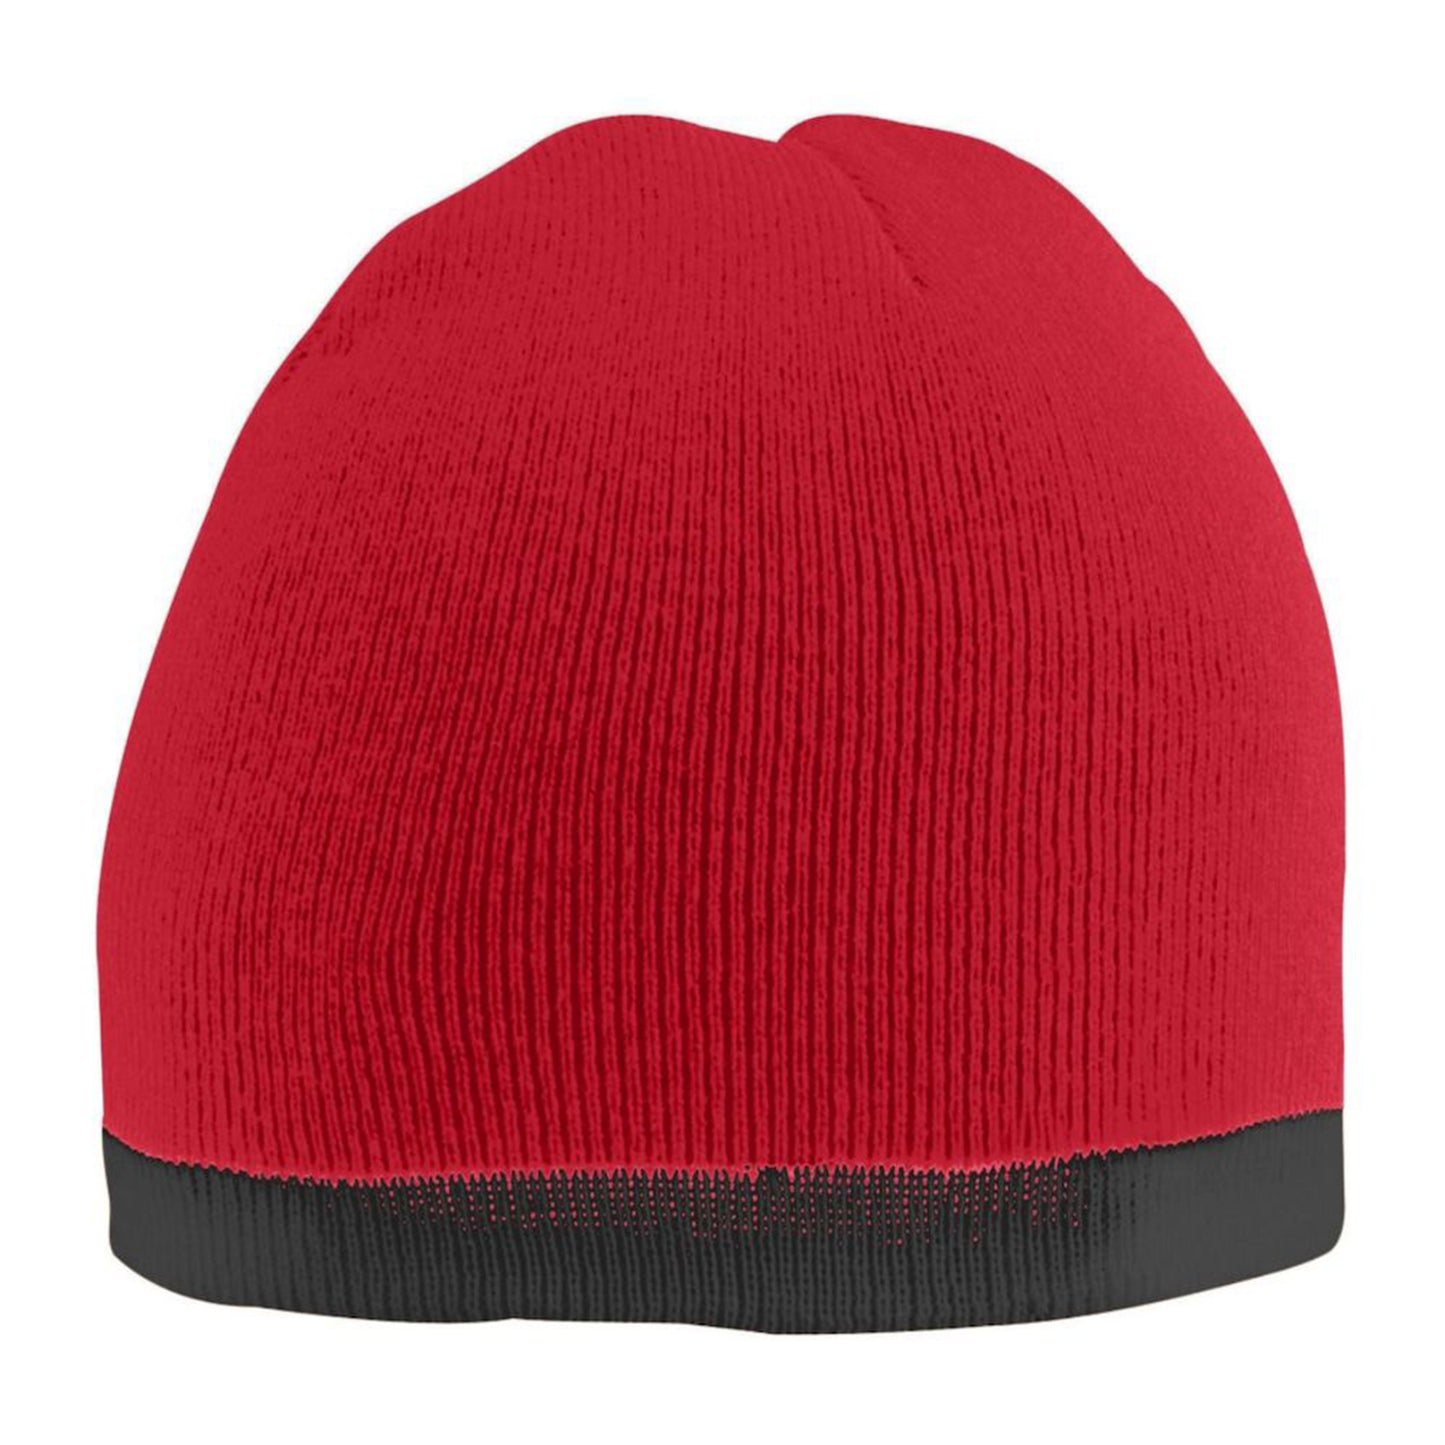 TWO TONED KNIT BEANIE 6820